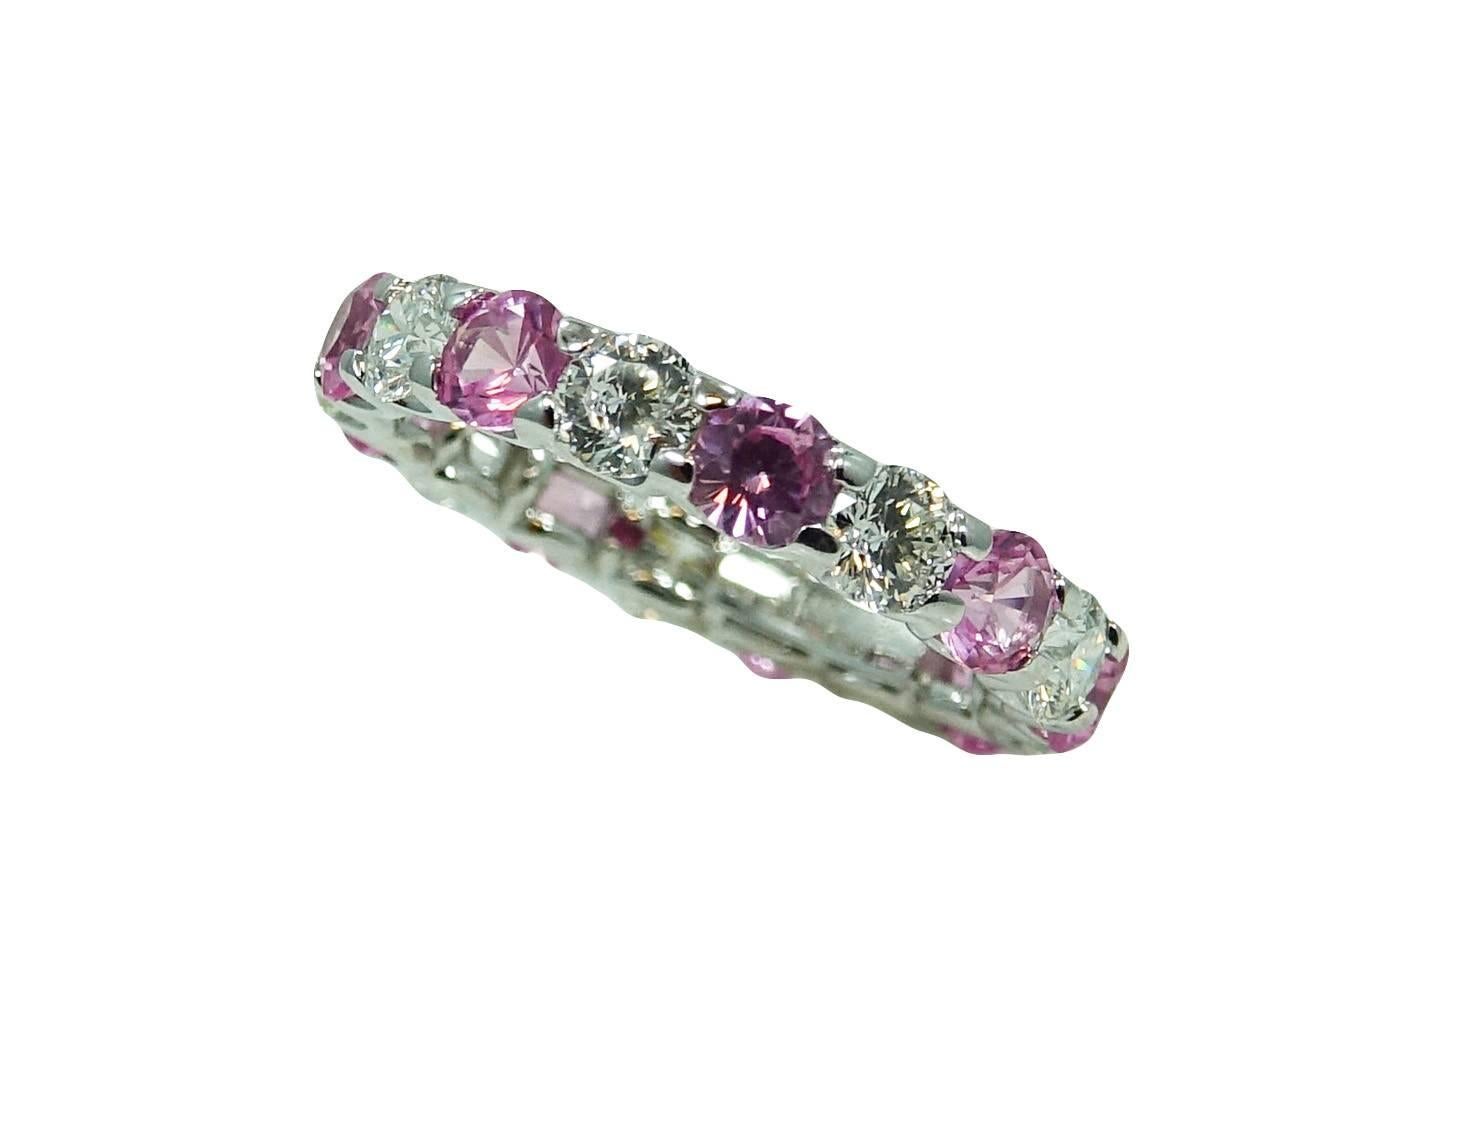 18K White Gold Estate Roberto Coin Cento Eternity Band With 9 Diamonds With A Total Carat Weight Of 1.45ct G Color And VS2 Clarity and 9 Pink Sapphires Weighing A Total Carat Weight Of 1.88ct. This Ring Is A Size 5.